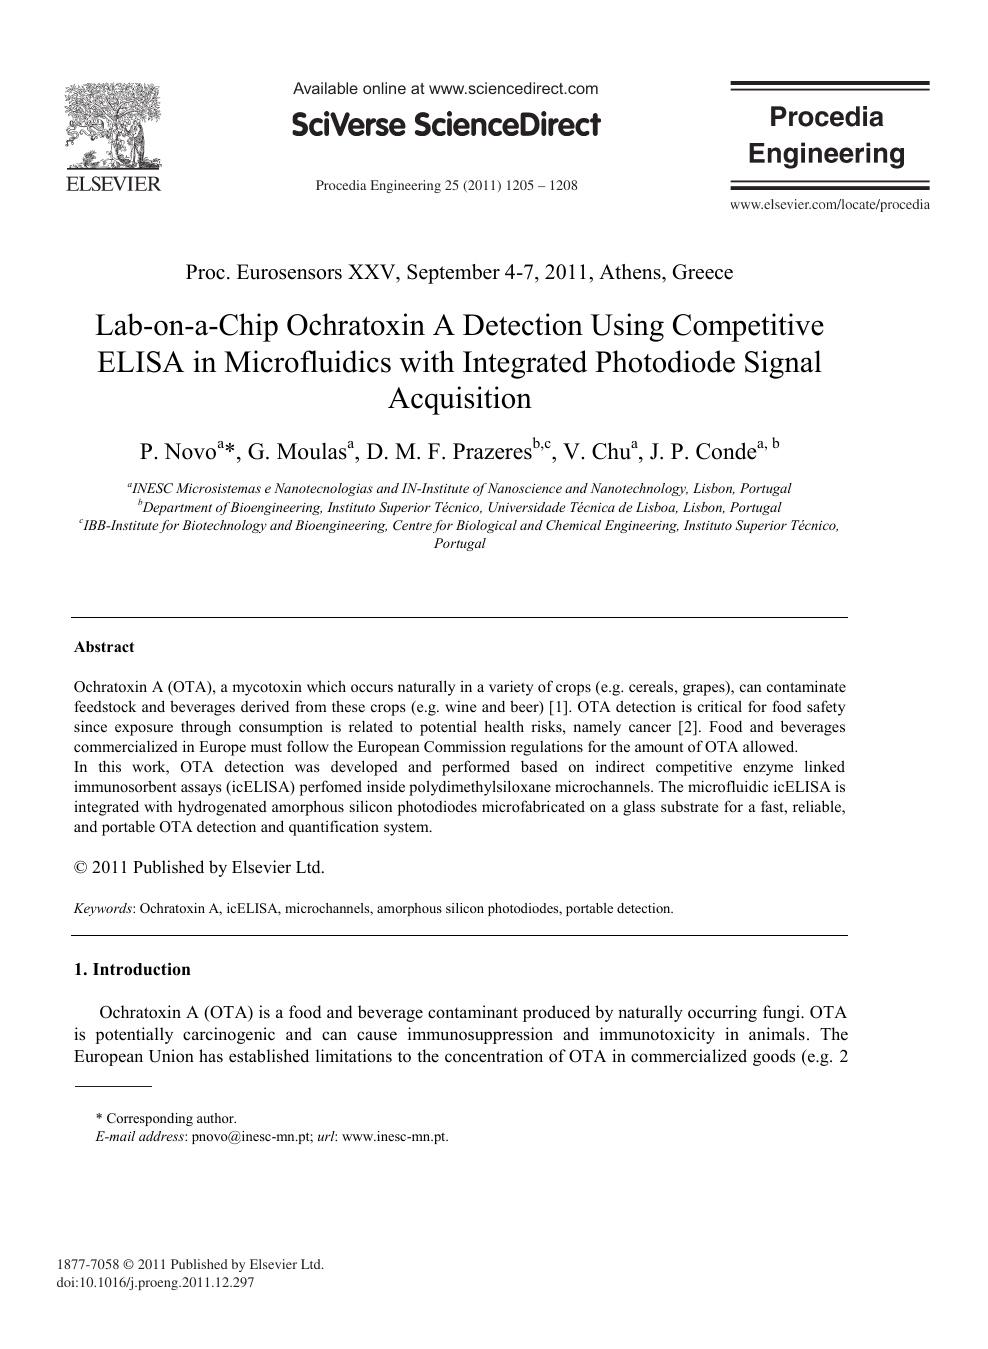 Lab On A Chip Ochratoxin A Detection Using Competitive Elisa In Microfluidics With Integrated Photodiode Signal Acquisition Topic Of Research Paper In Nano Technology Download Scholarly Article Pdf And Read For Free On Cyberleninka Open